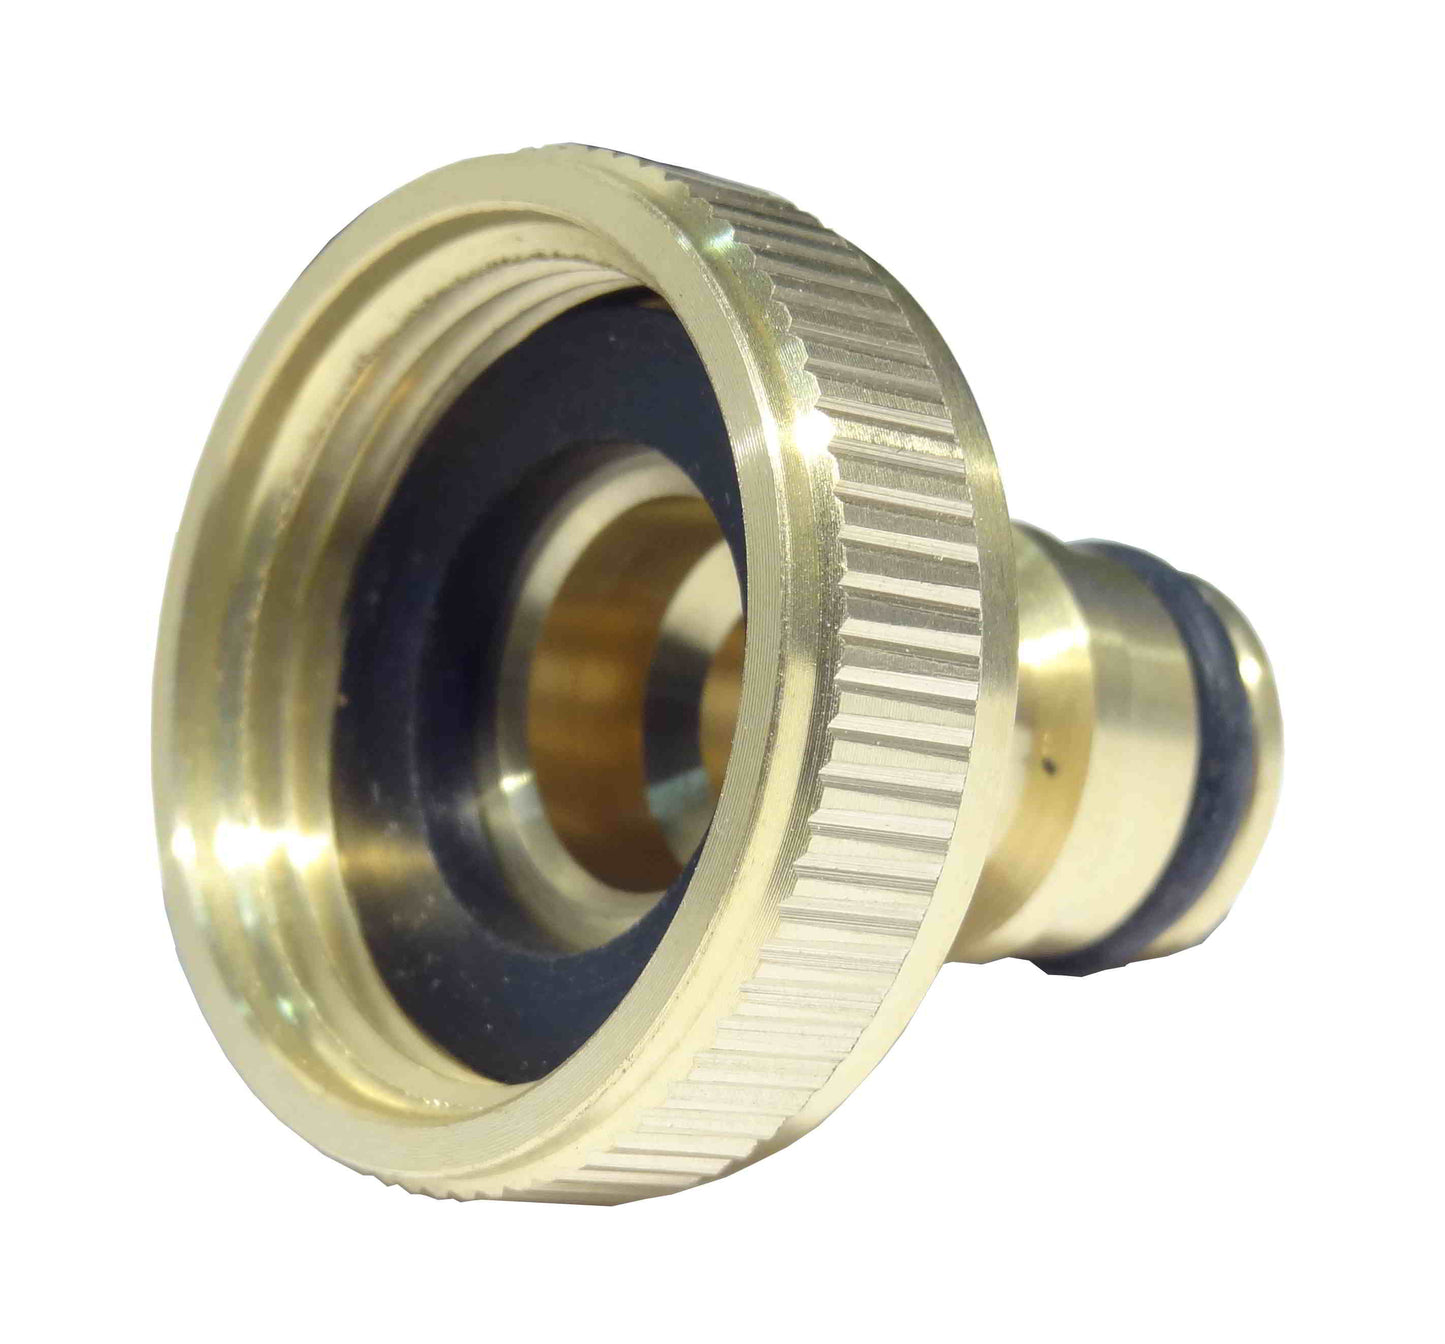 Atoni Brass 3/4" Inch Farmers Tap Connector